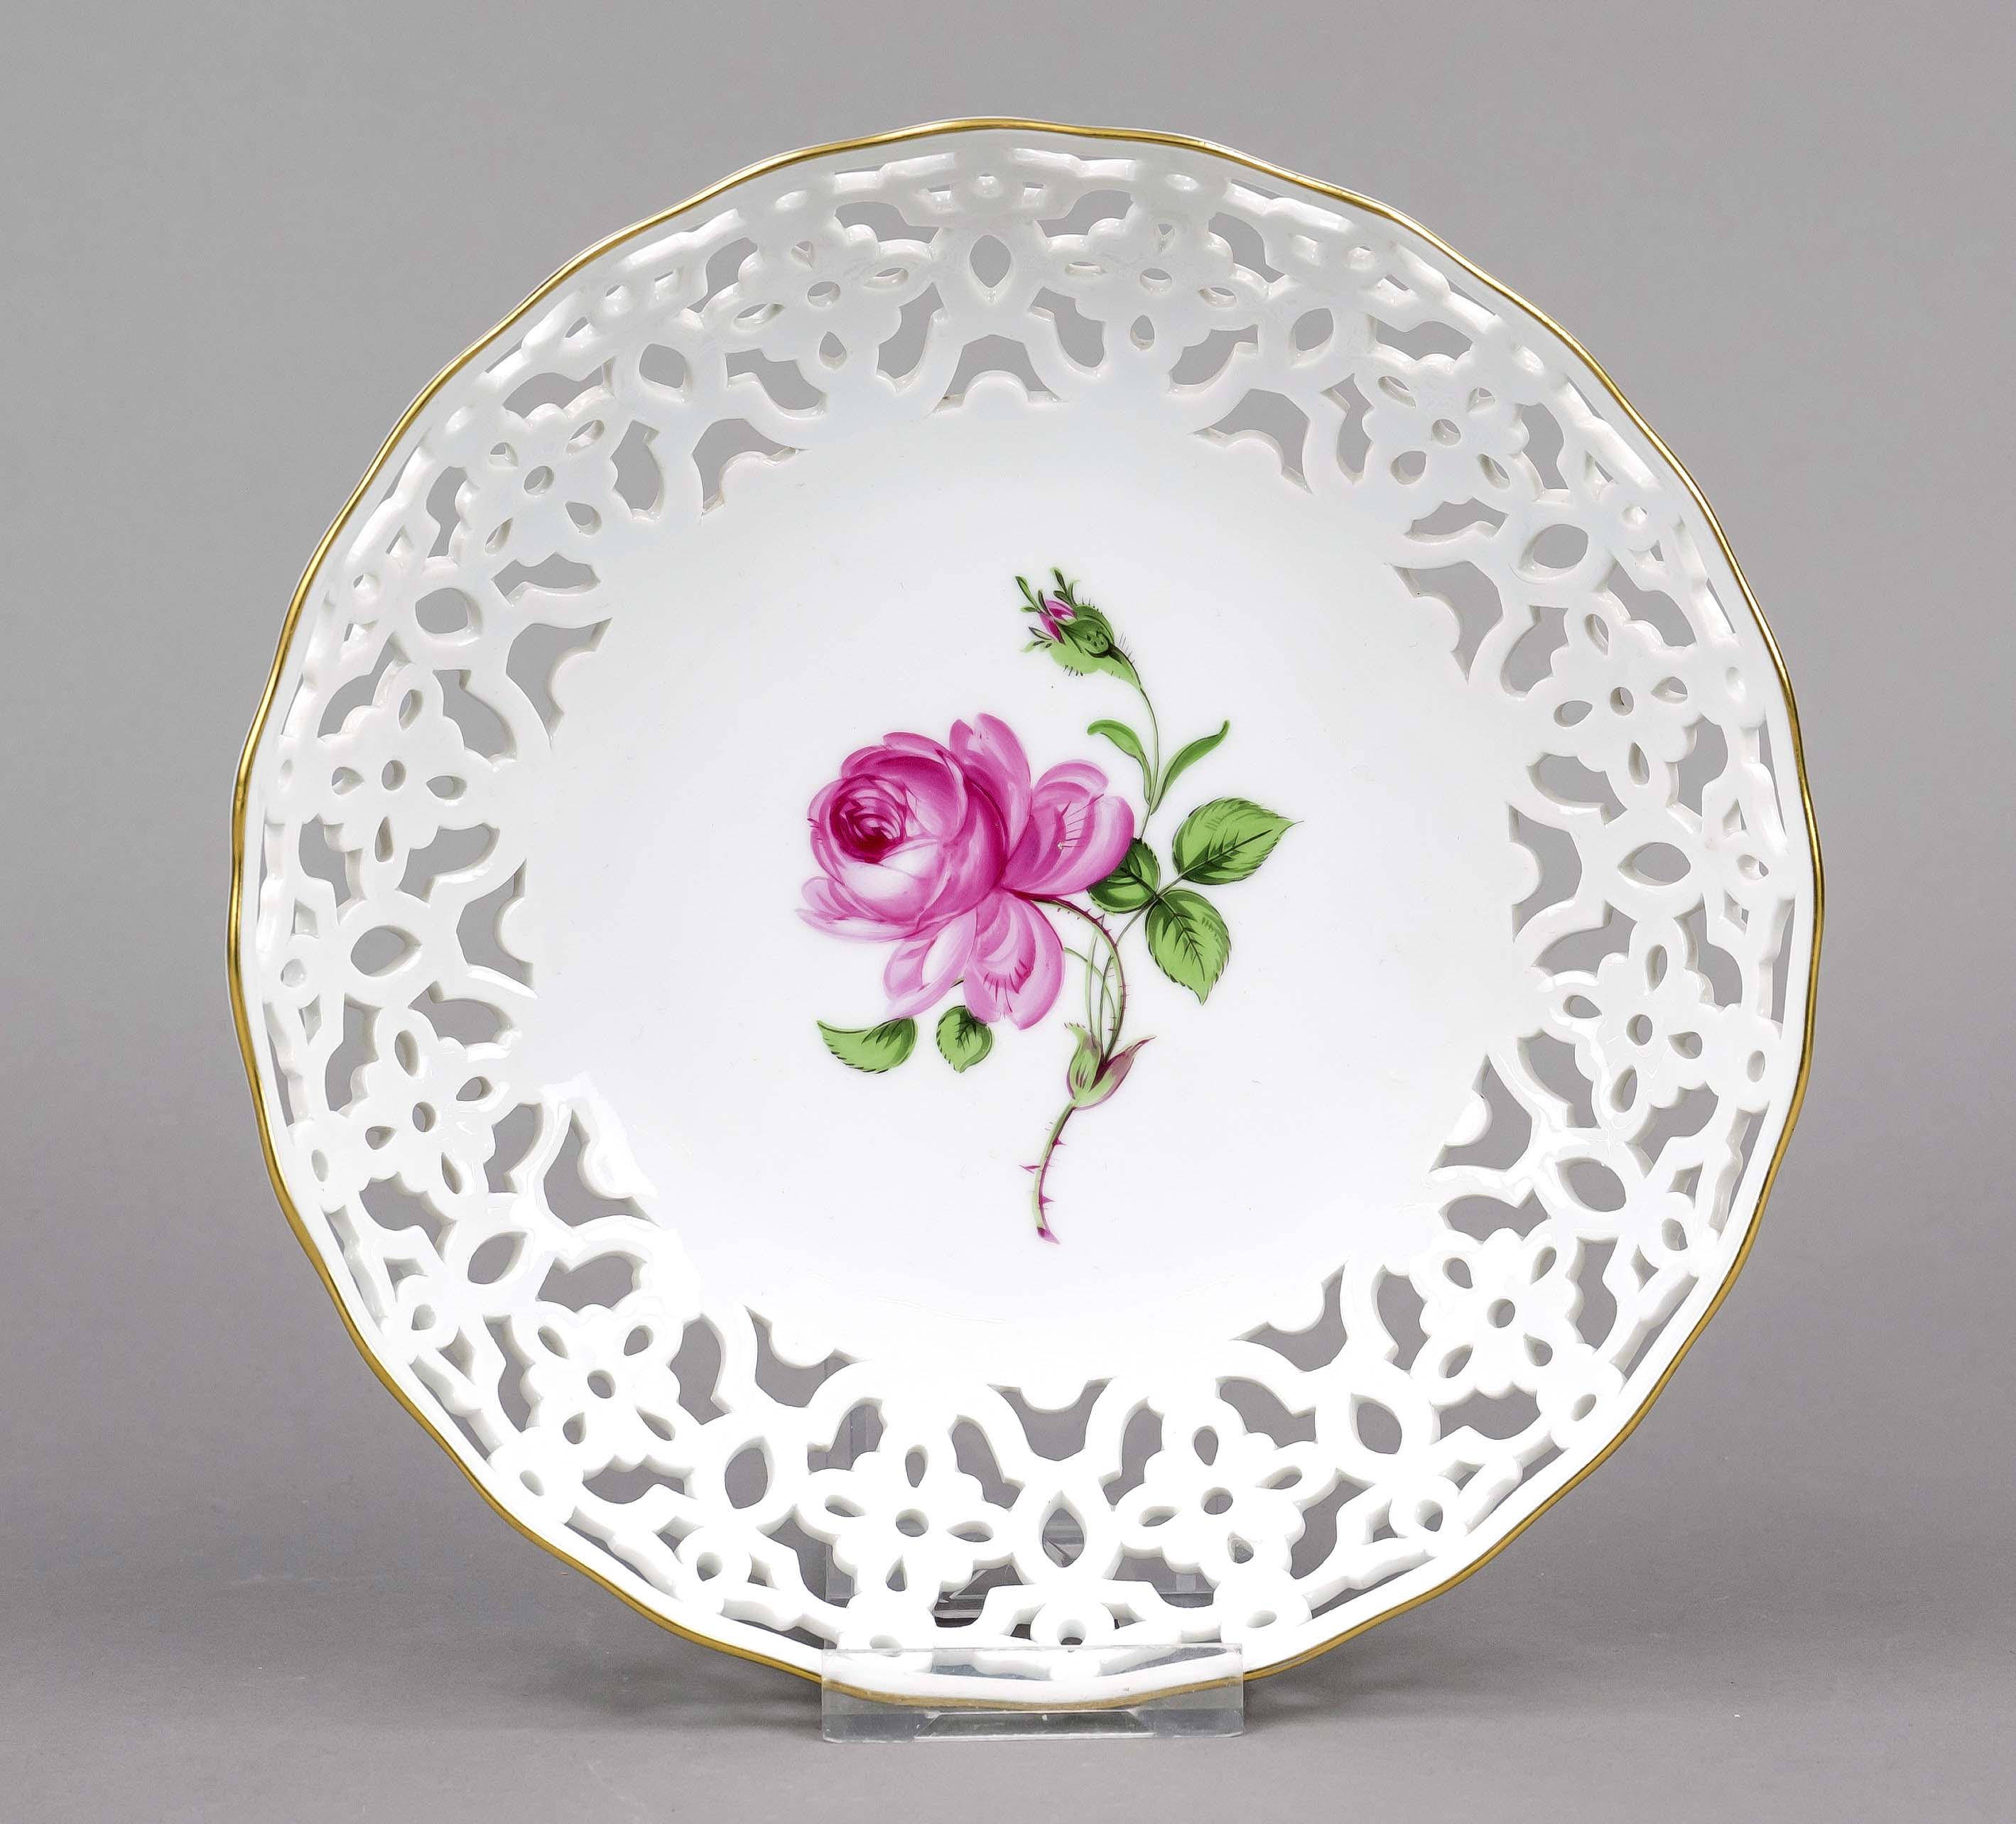 Round bowl, Meissen, 1905s, 2nd choice, pierced wall with floral pattern, polychrome flower painting